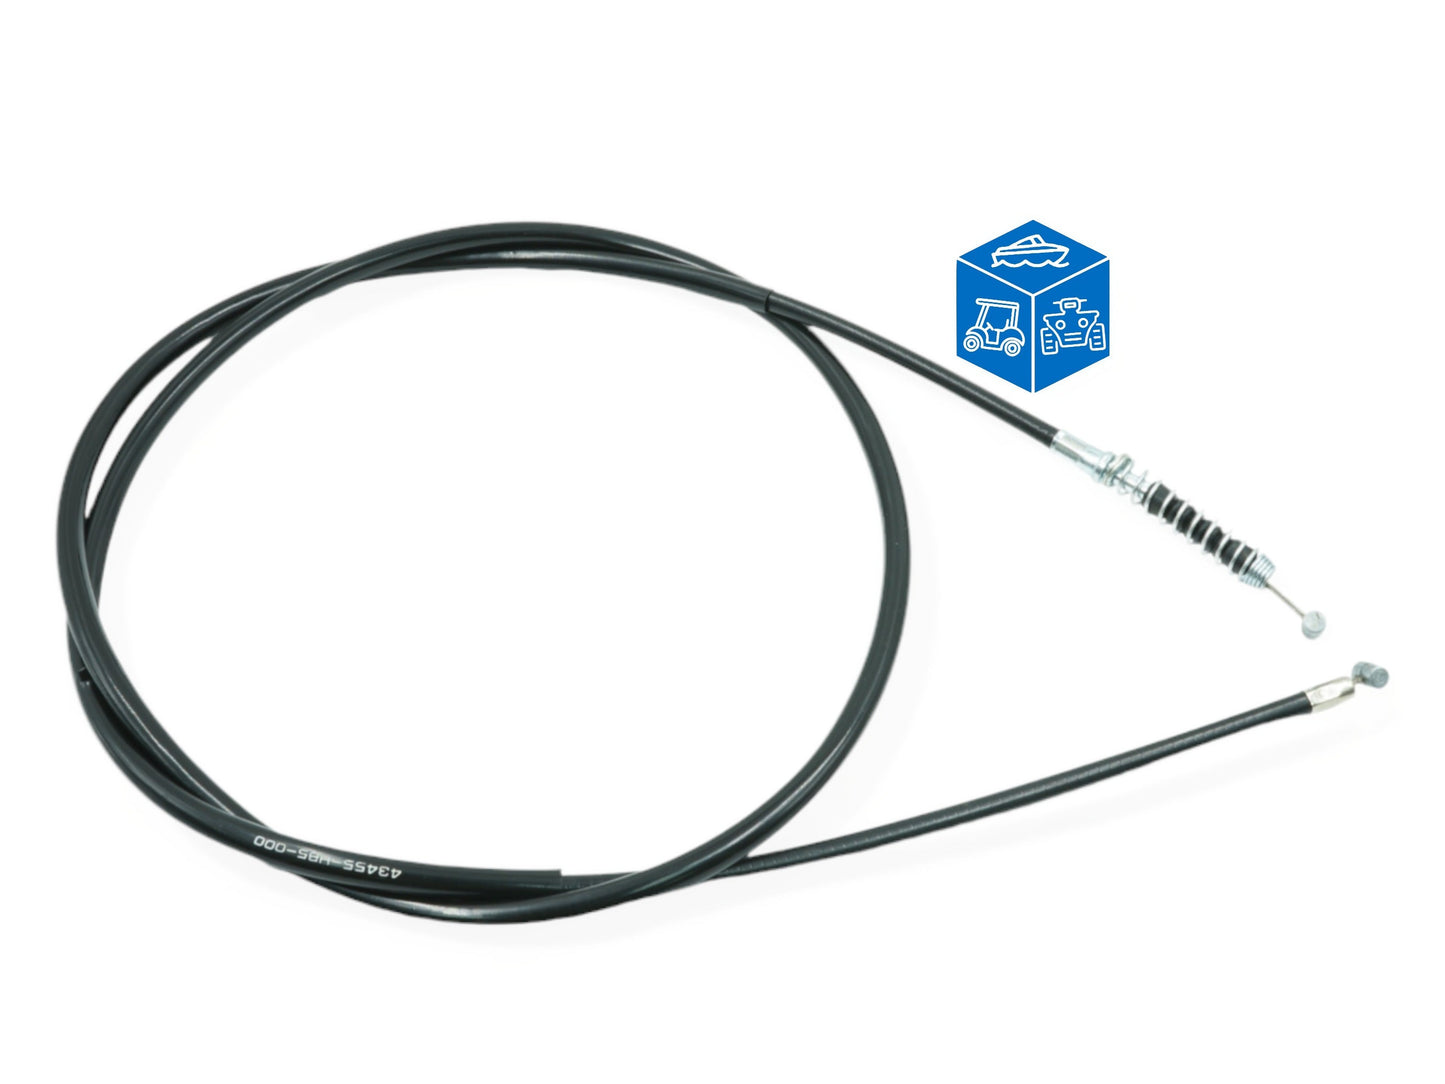 New Replacement Rear Hand Brake Cable Fits Honda TRX 300ex Sportrax 1993-2008